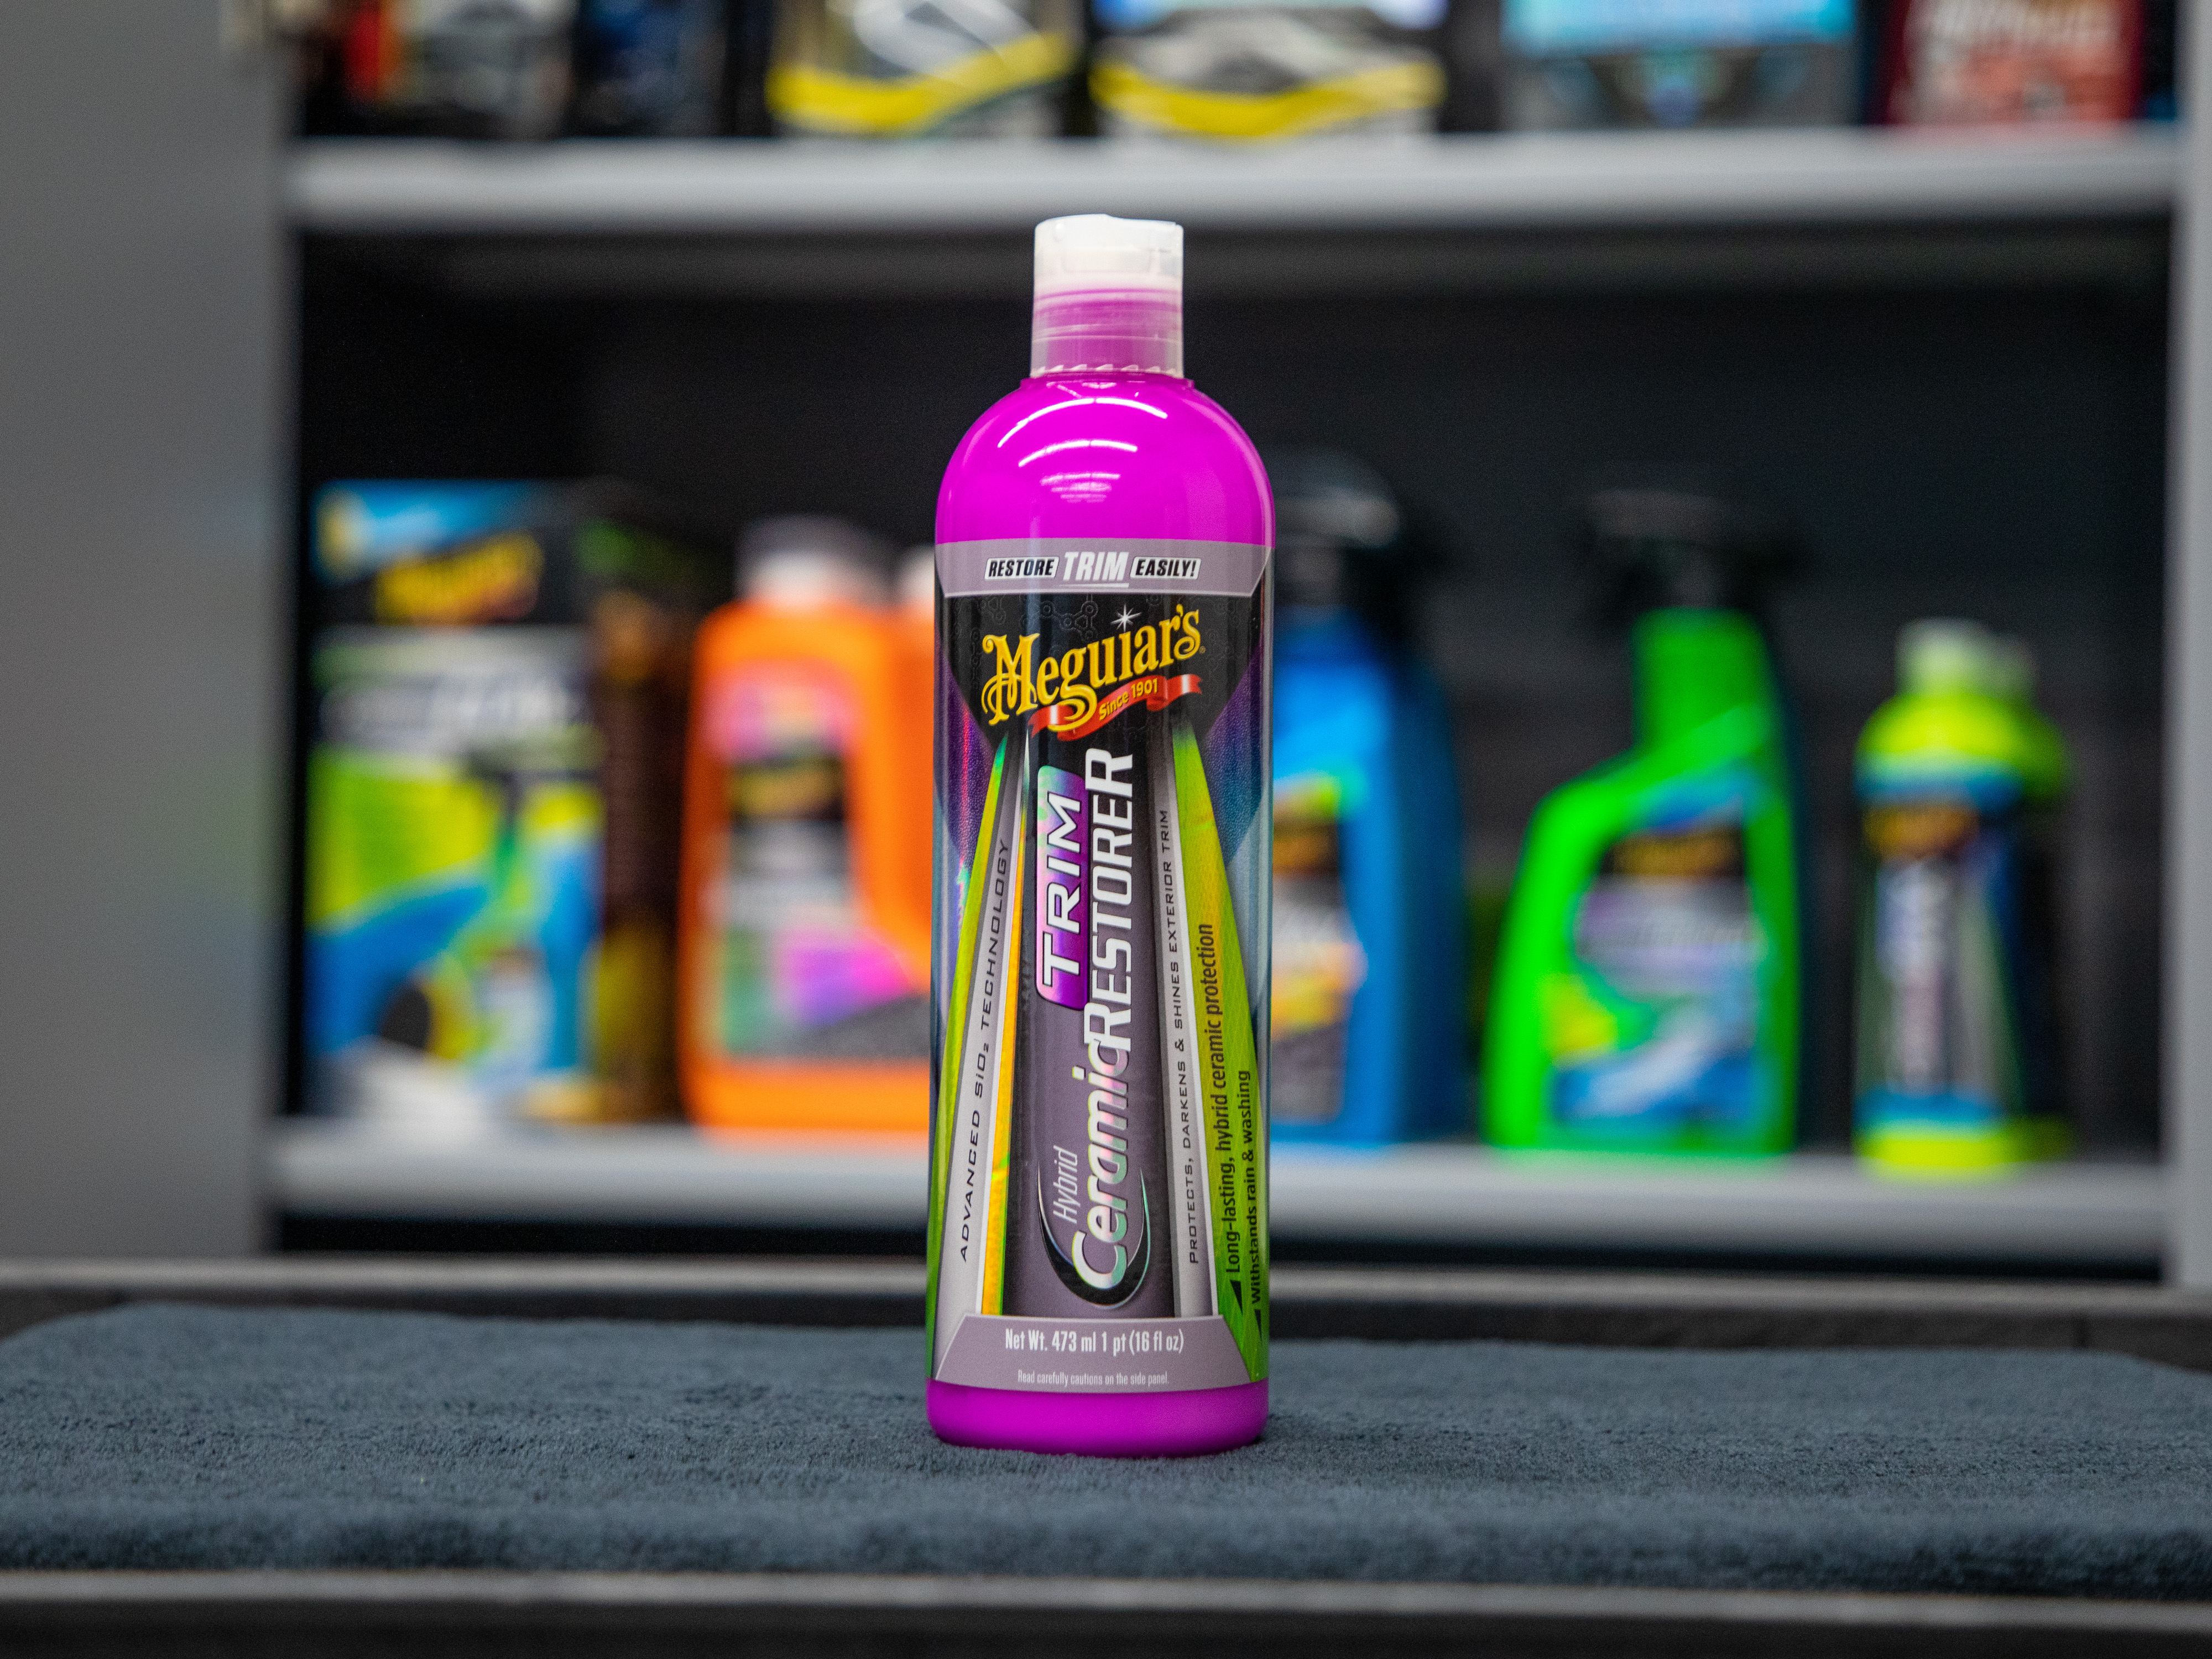 Meguiar's Ultimate Black Plastic Restorer - Restore Faded Exterior Trim,  Add Shine and Protect Exterior Trim with Durability and UV Protection -  Makes